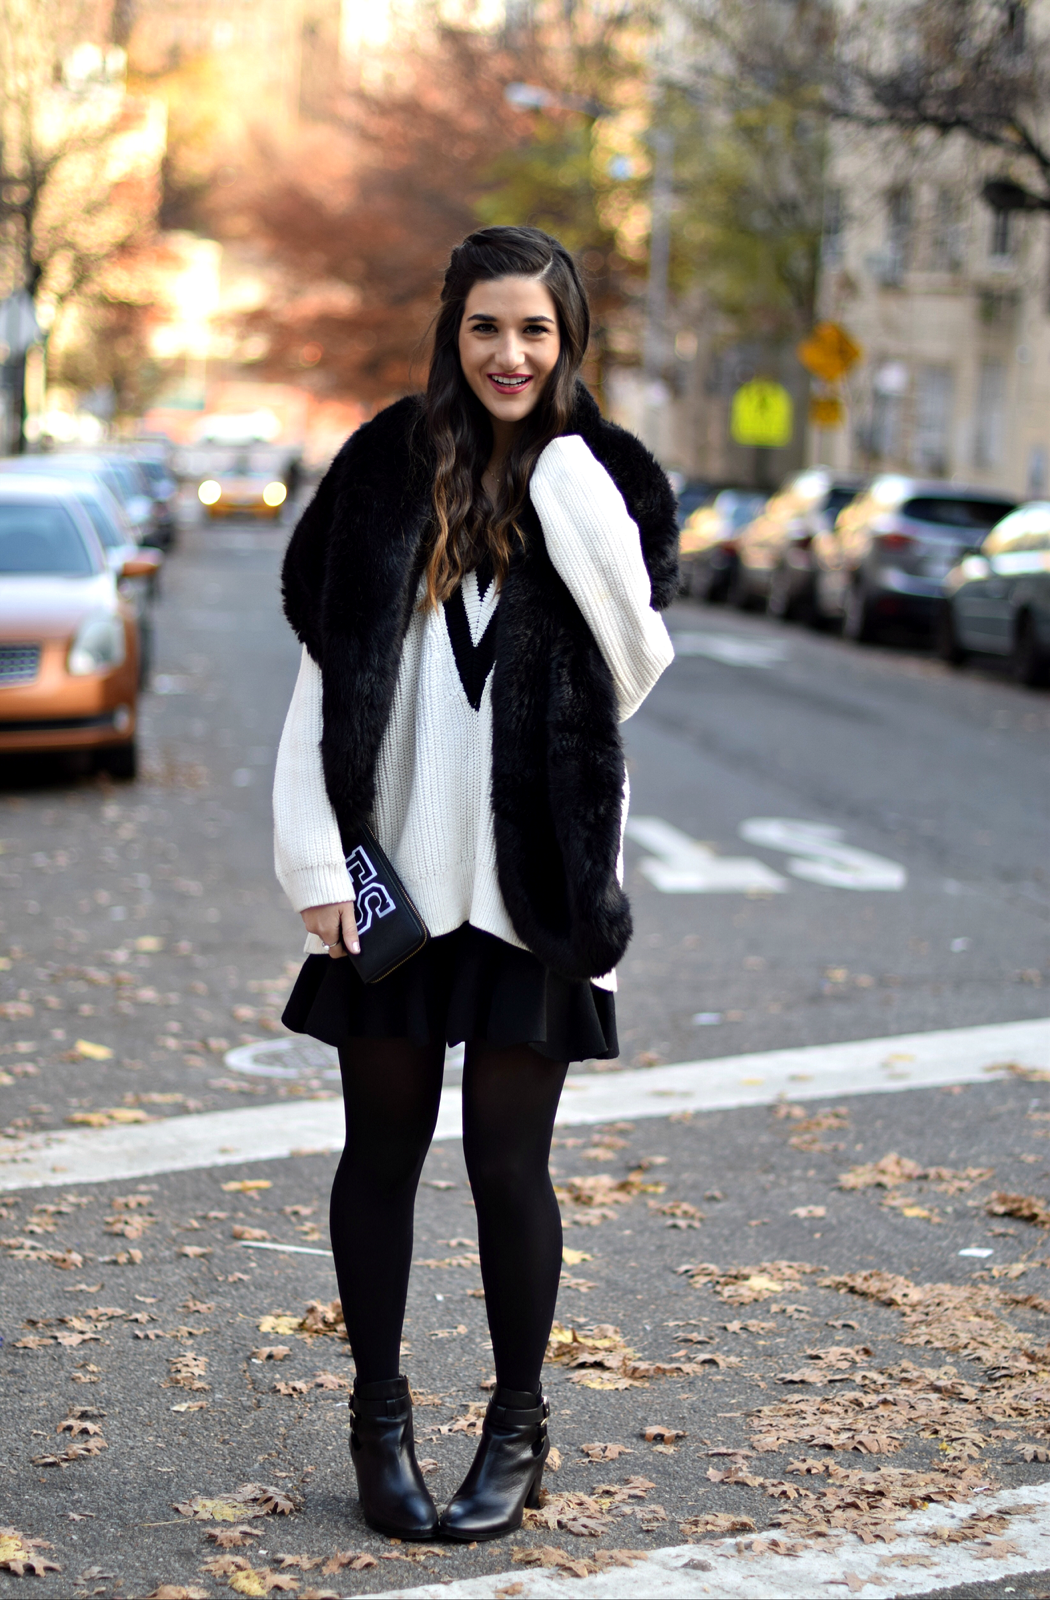 Chunky Varsity Knit Fur Stole Louboutins & Love Fashion Blog Esther Santer NYC Street Style Blogger Sweater Girl Women Photoshoot Model Shoes Black Booties Louise et Cie Nordstrom Hair Swag H&M Mini Skirt Neutrals OOTD Outfit Tights Shop Winter Wear.jpg